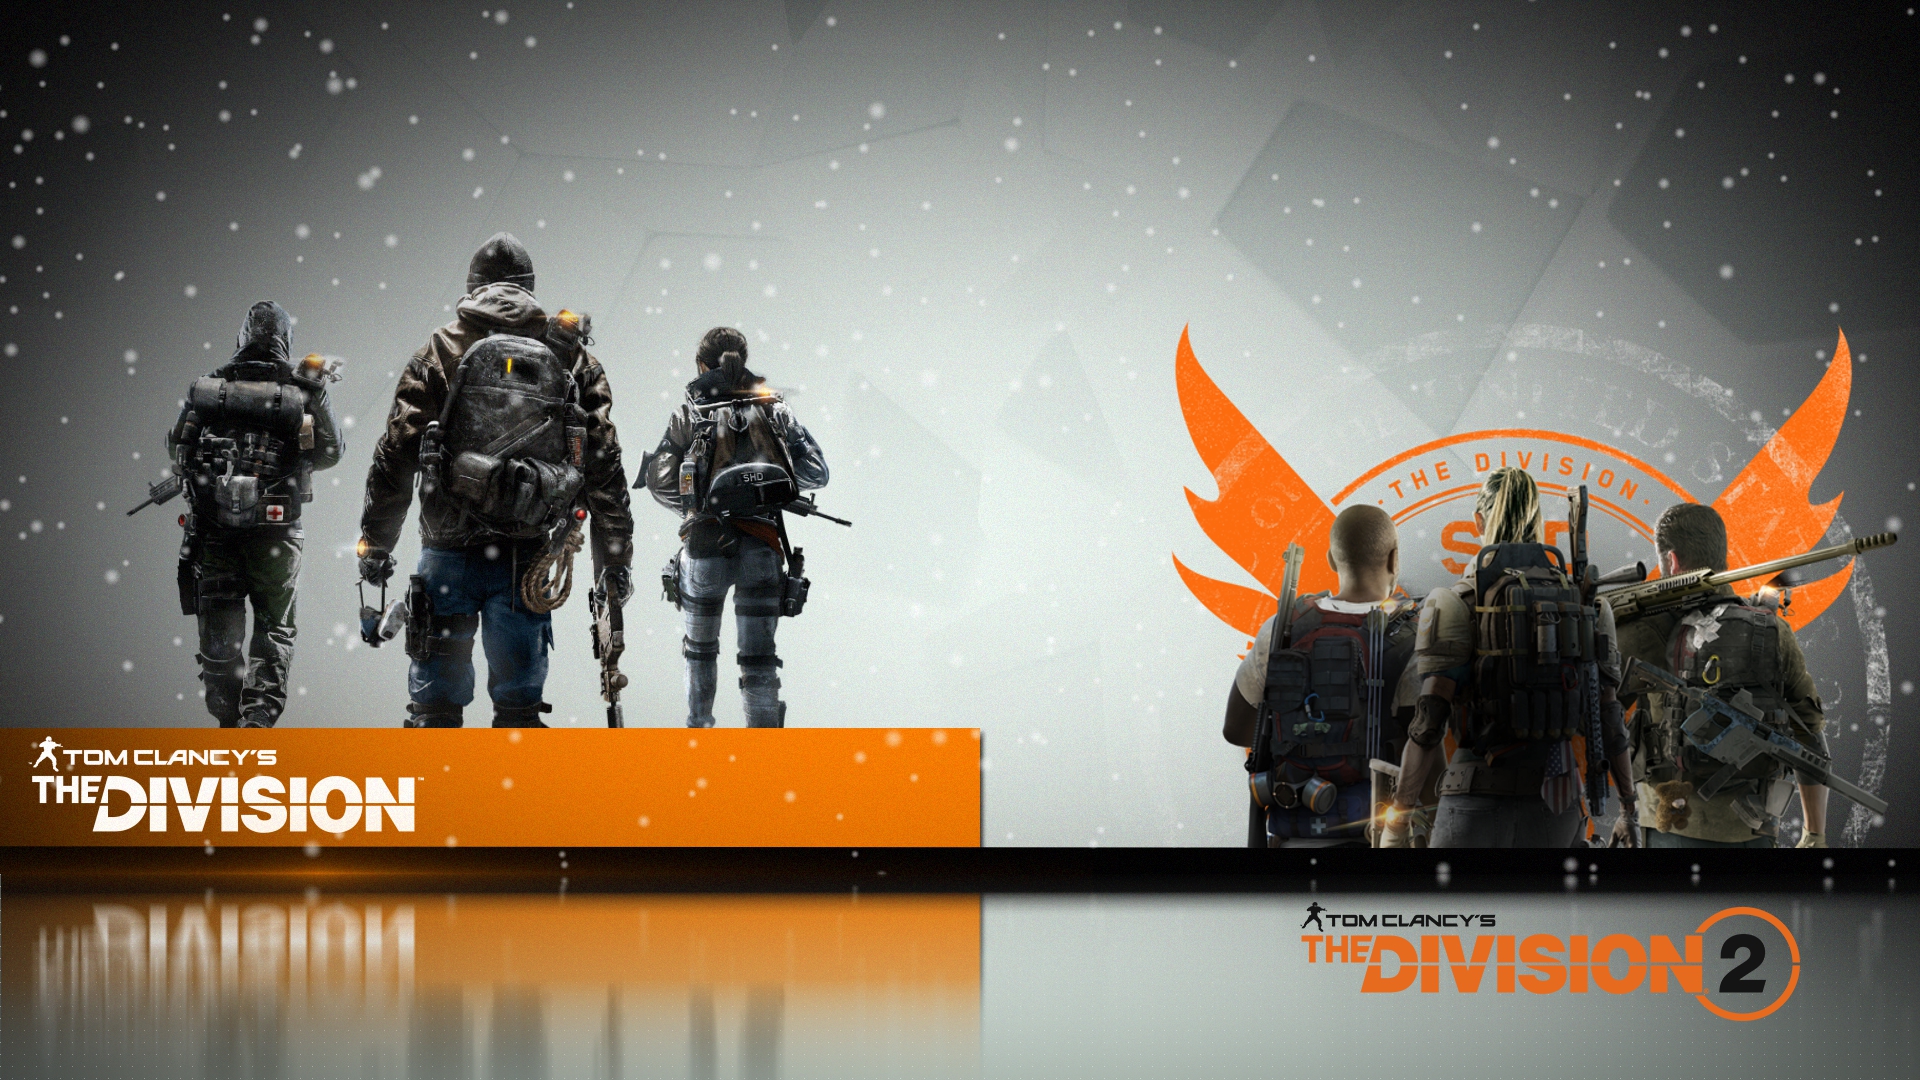 General 1920x1080 Tom Clancy's The Division Tom Clancy's The Division 2 video games Ubisoft